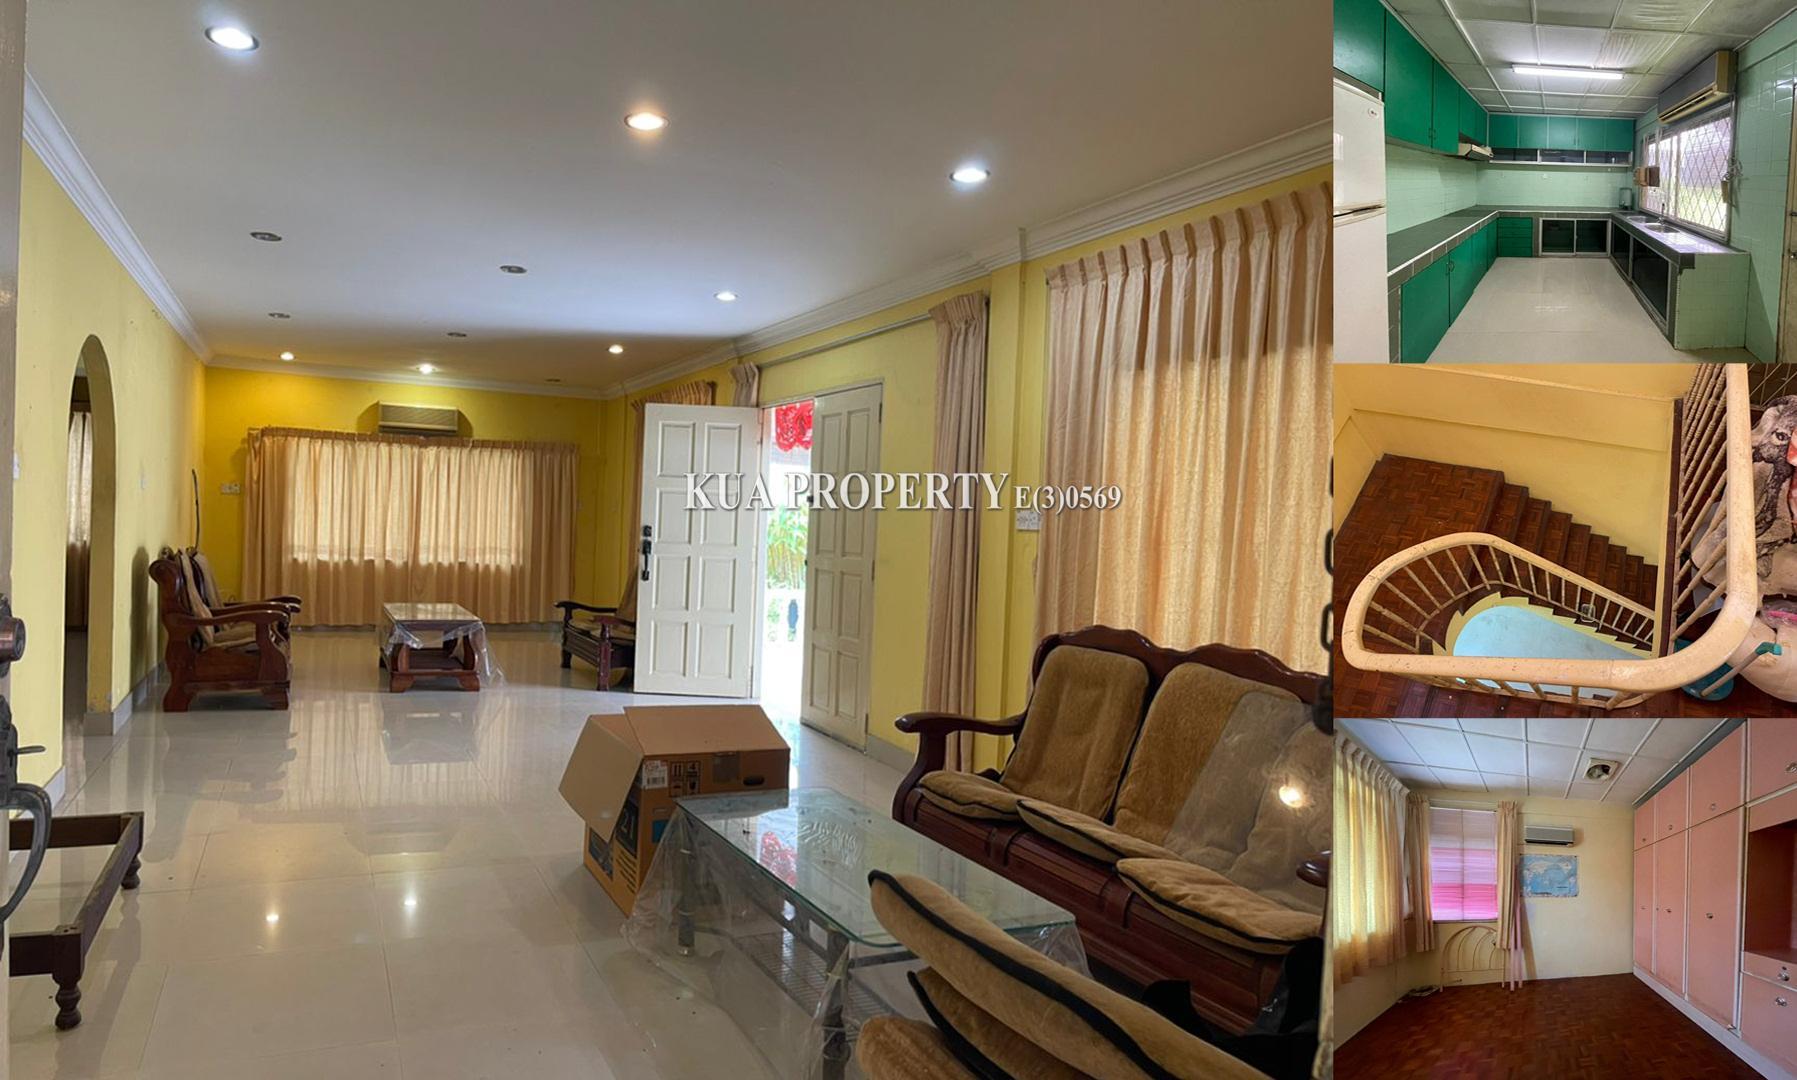 Double Storey Detached house For Sale!at Taman Wee and Wee, Jalan Kapor